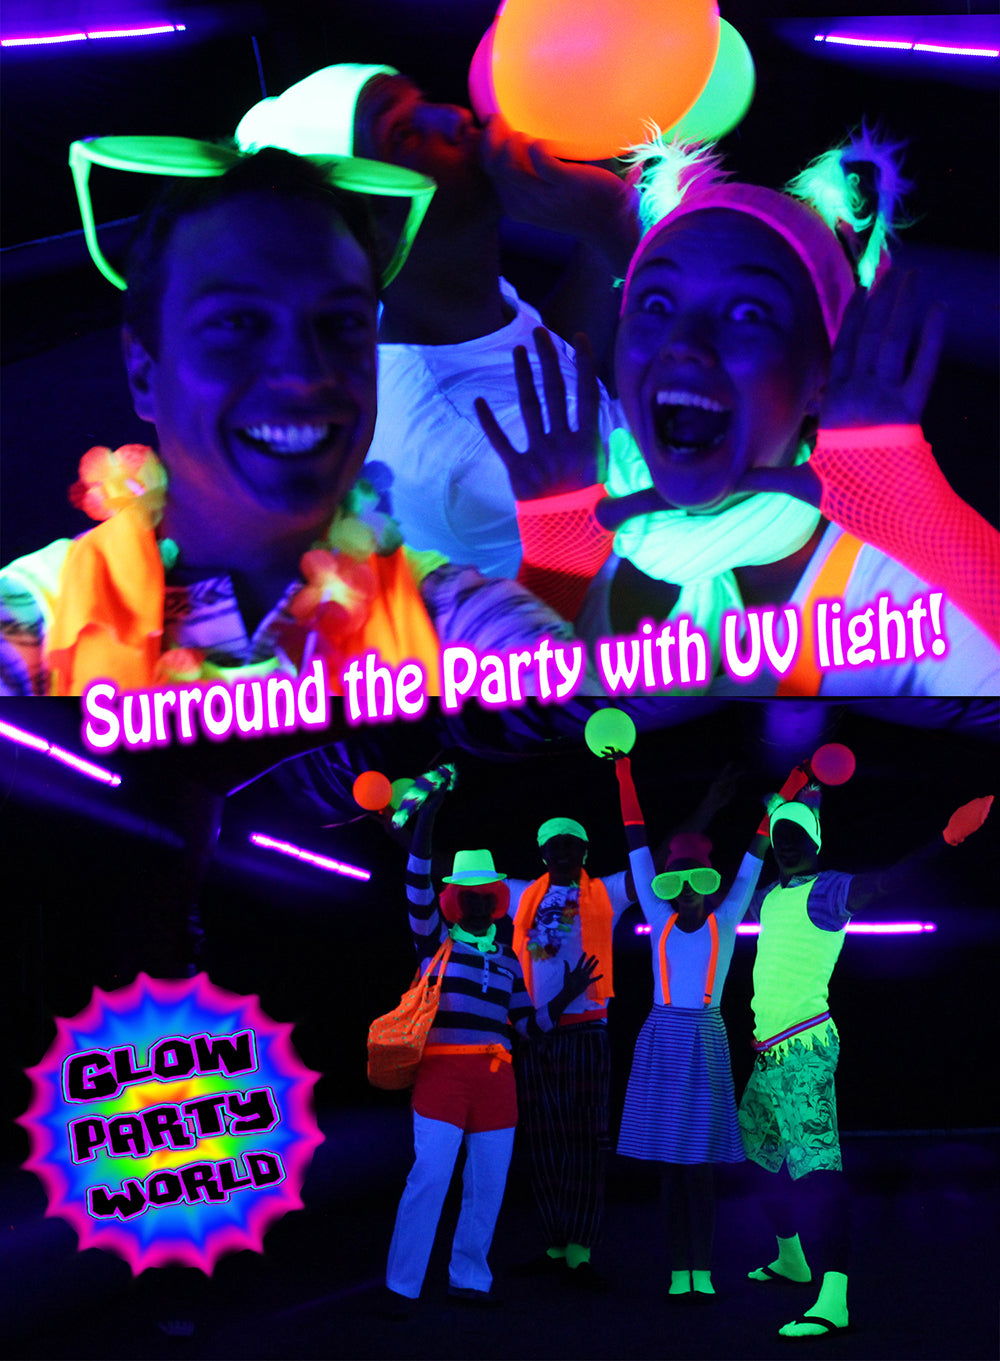 Blacklight party  Neon party outfits, Glow party outfit, Glow outfits